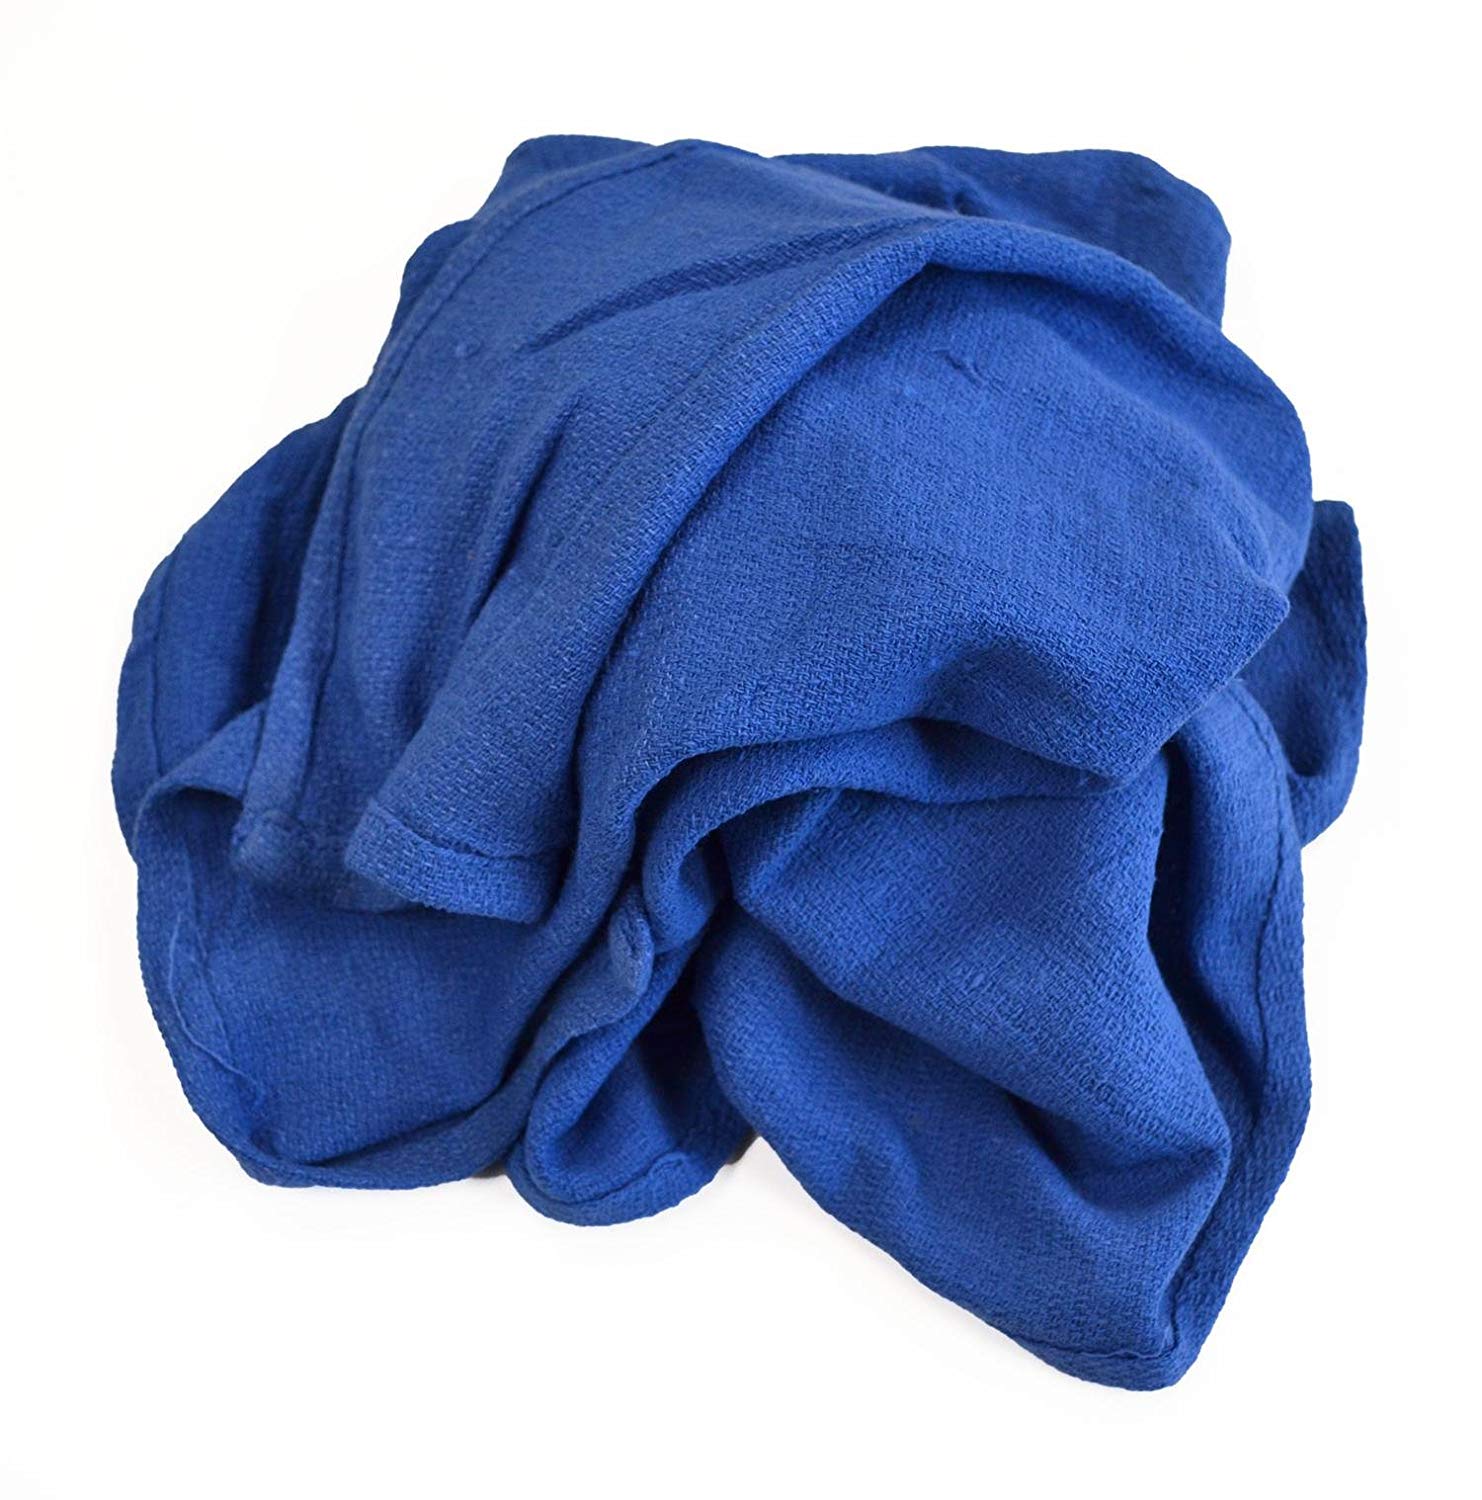 Reclaimed Huck Towels, Wholesale Prices